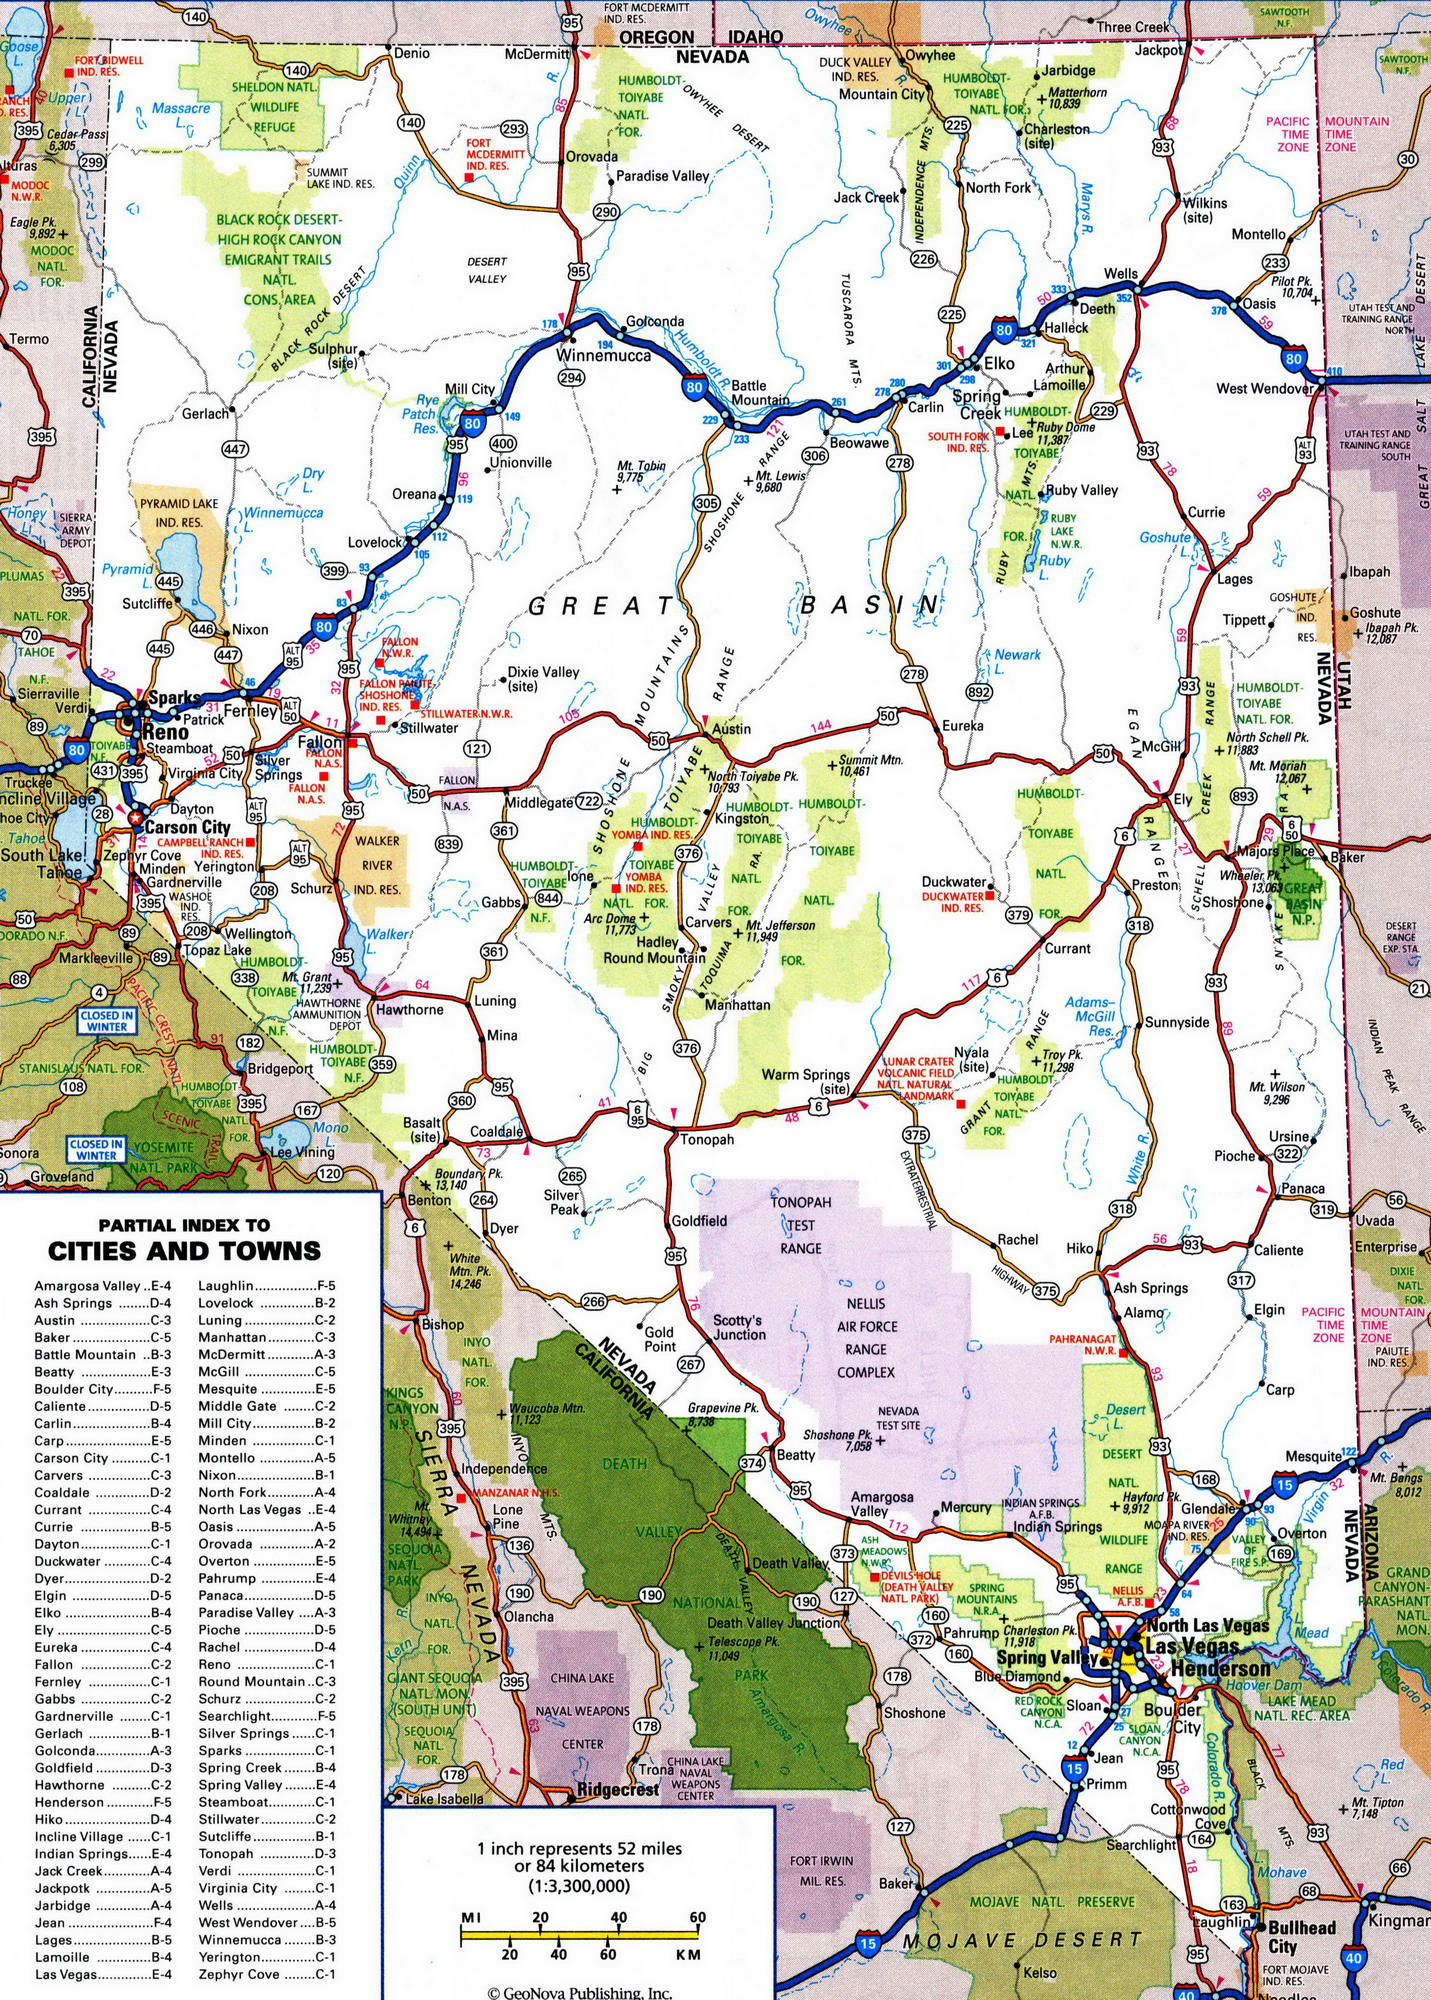 Detailed roads map of Nevada